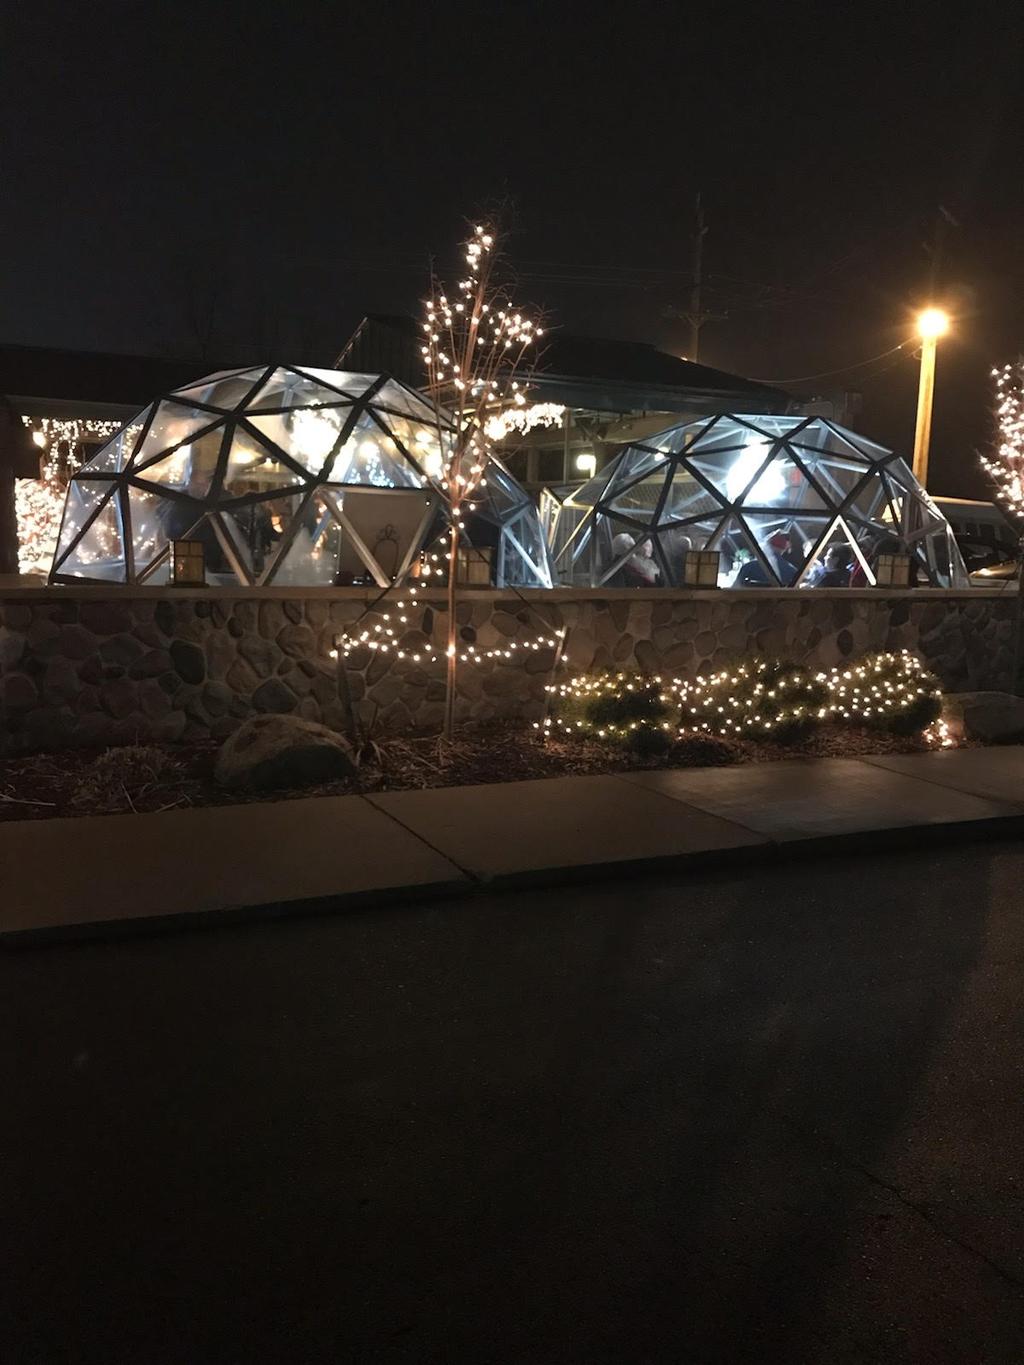 The igloo reservation requires a $200 minimum purchase for the group. In order to attend (and meet the $200 minimum), each person must agree to purchase a dinner for $20 or more.